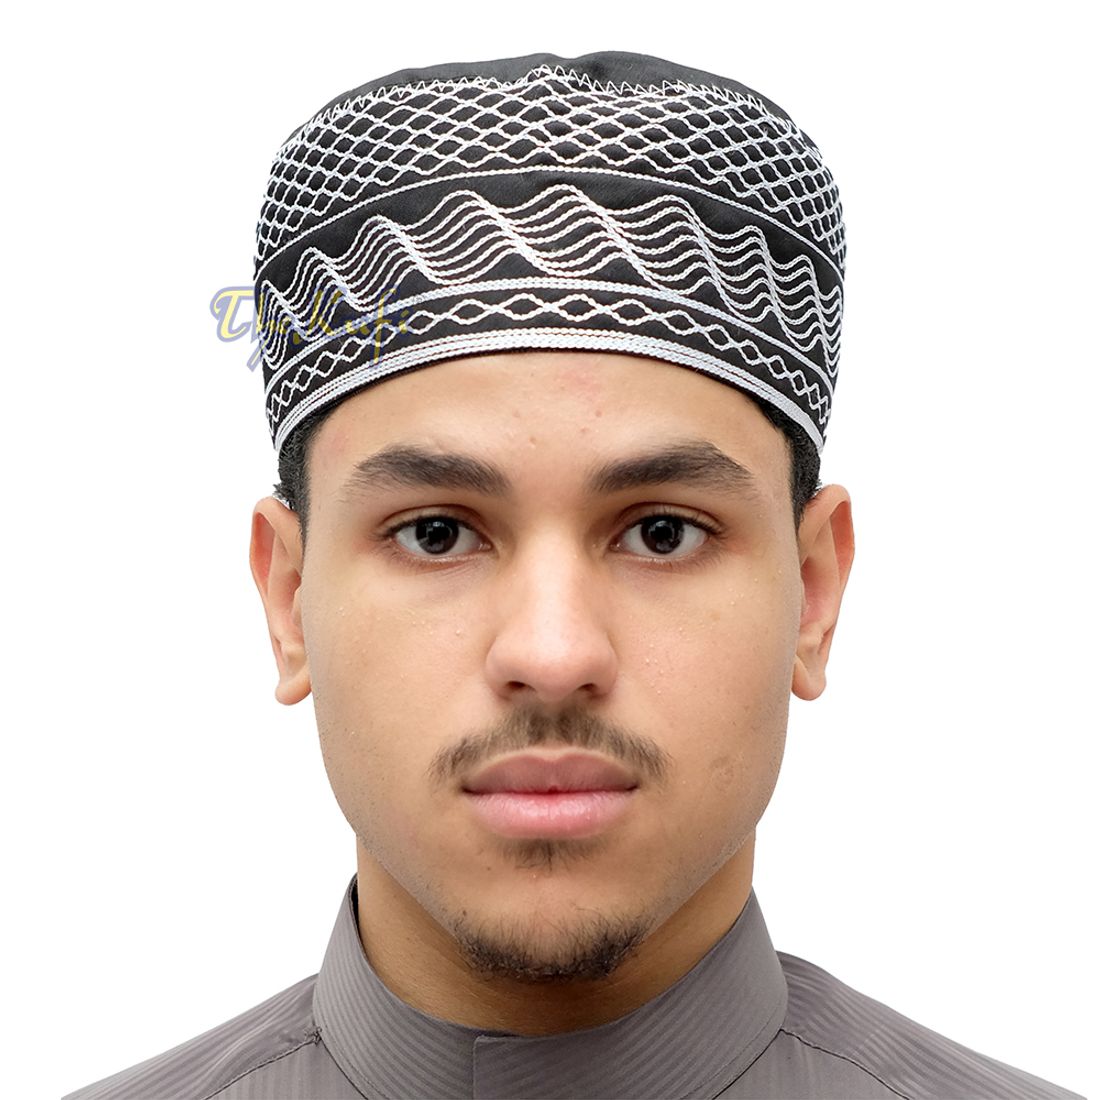 Islamic Kufi Hat | 3″ Tall Handcrafted Cotton-blend Cap with Black & Silver Embroidery